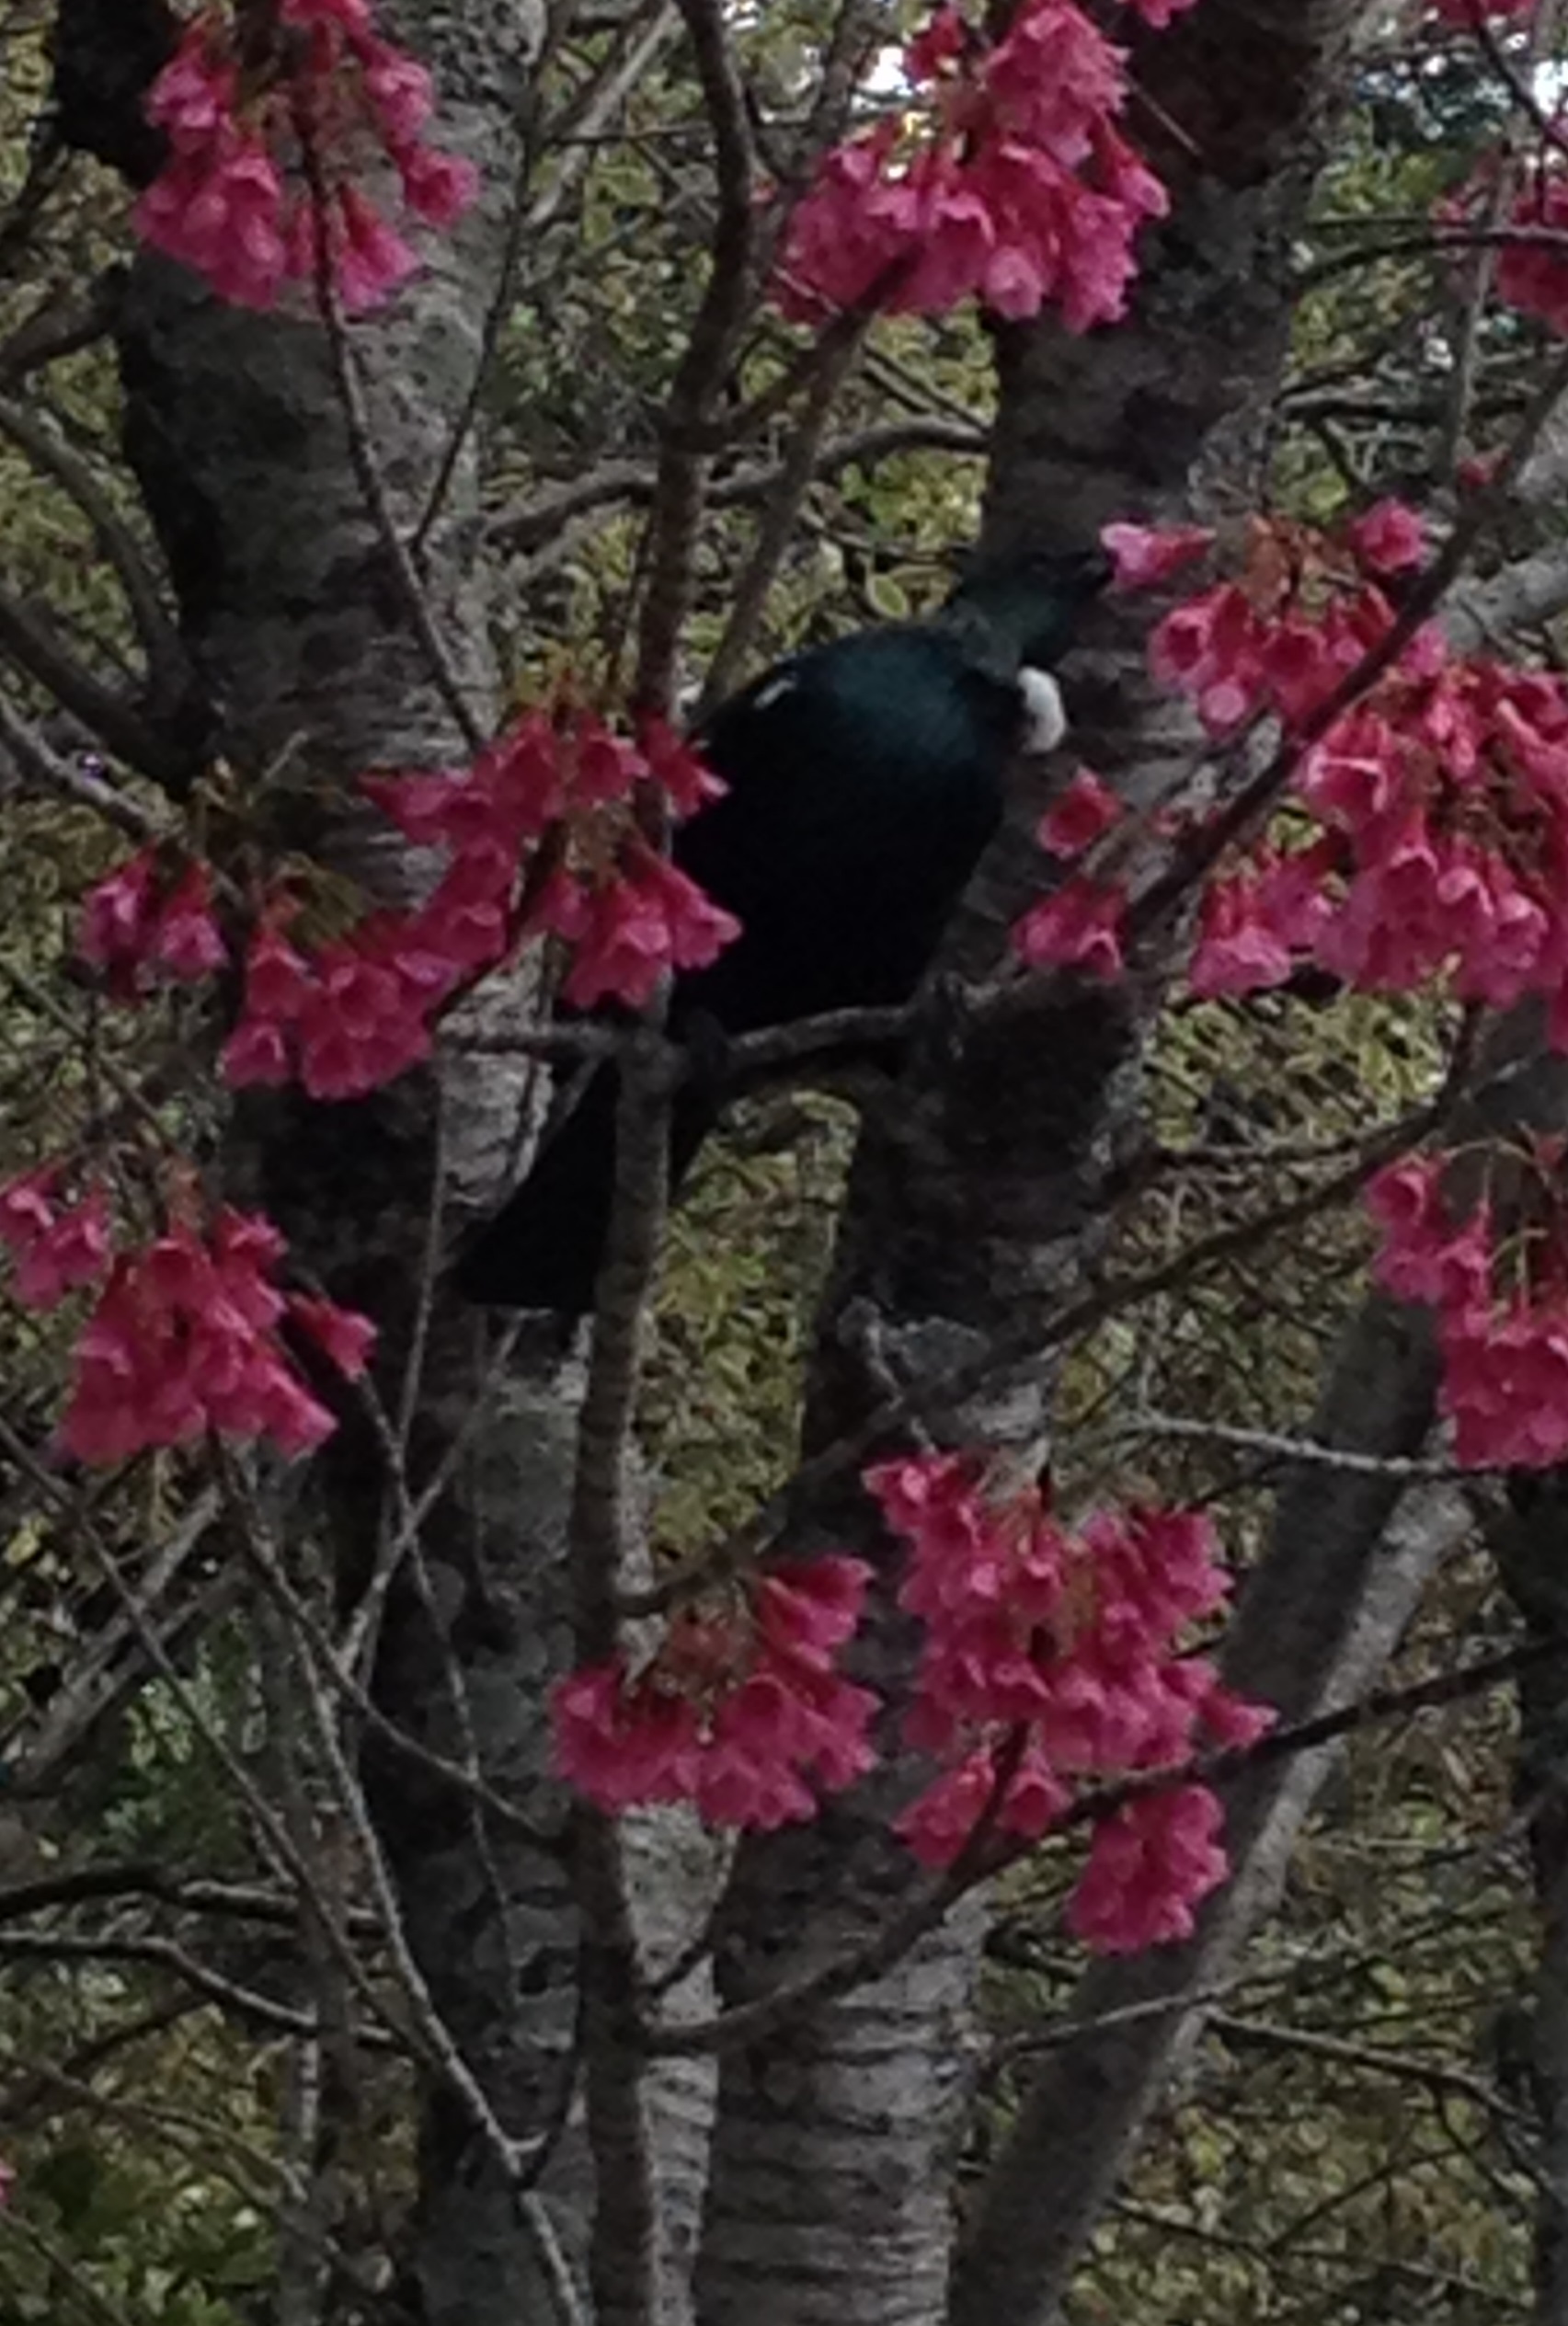 Tui in the Tree